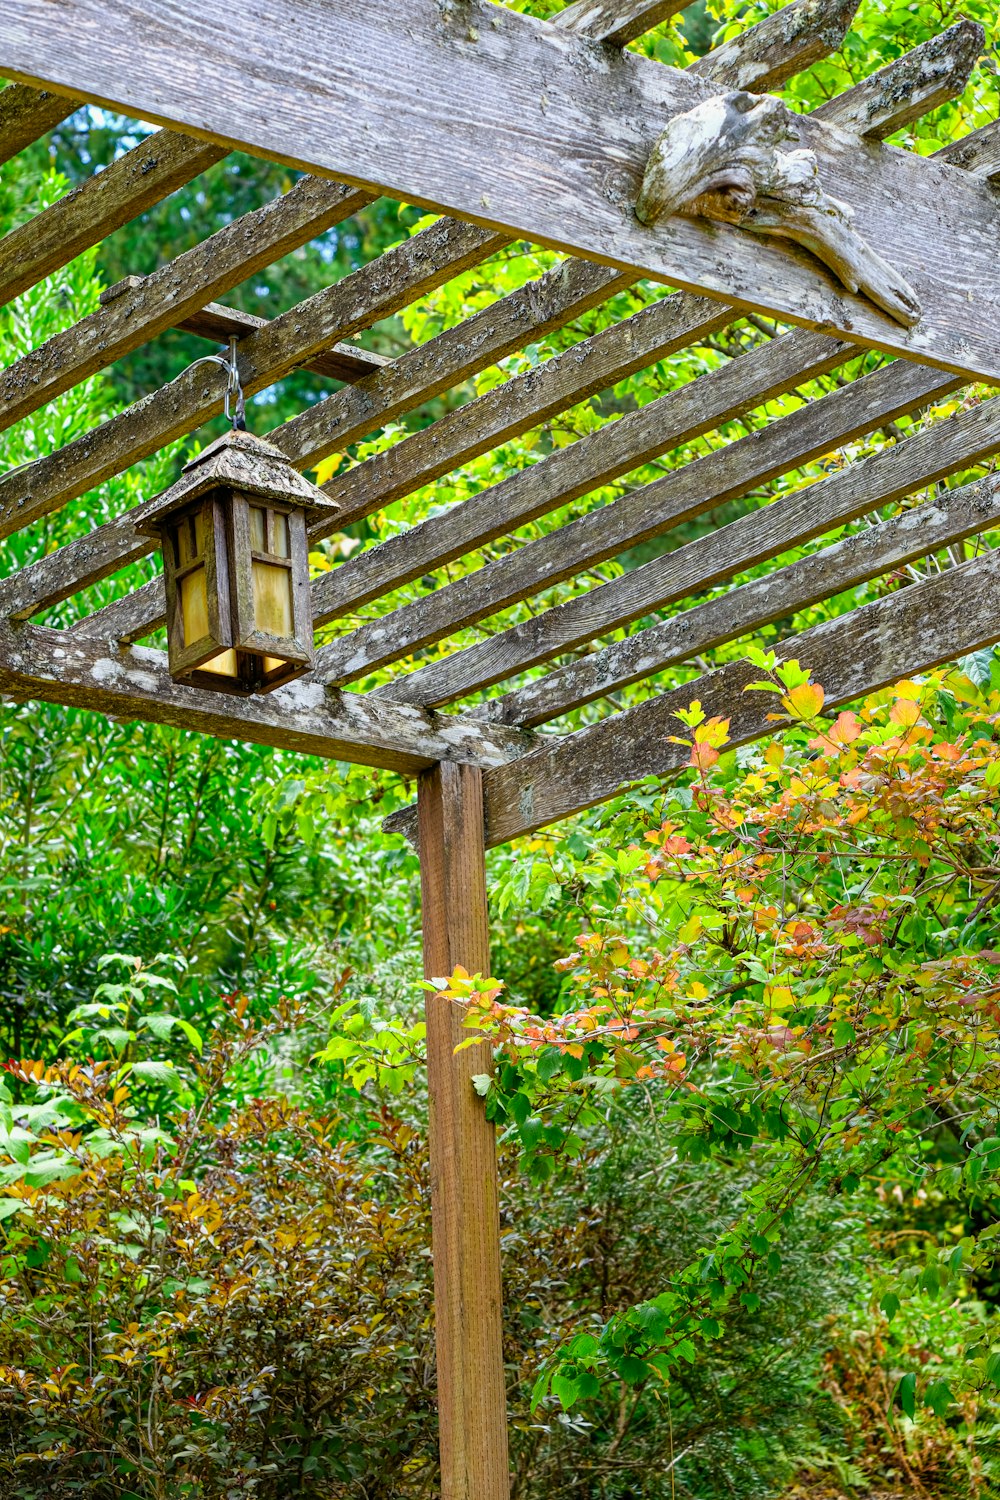 a bird feeder hanging from a wooden structure